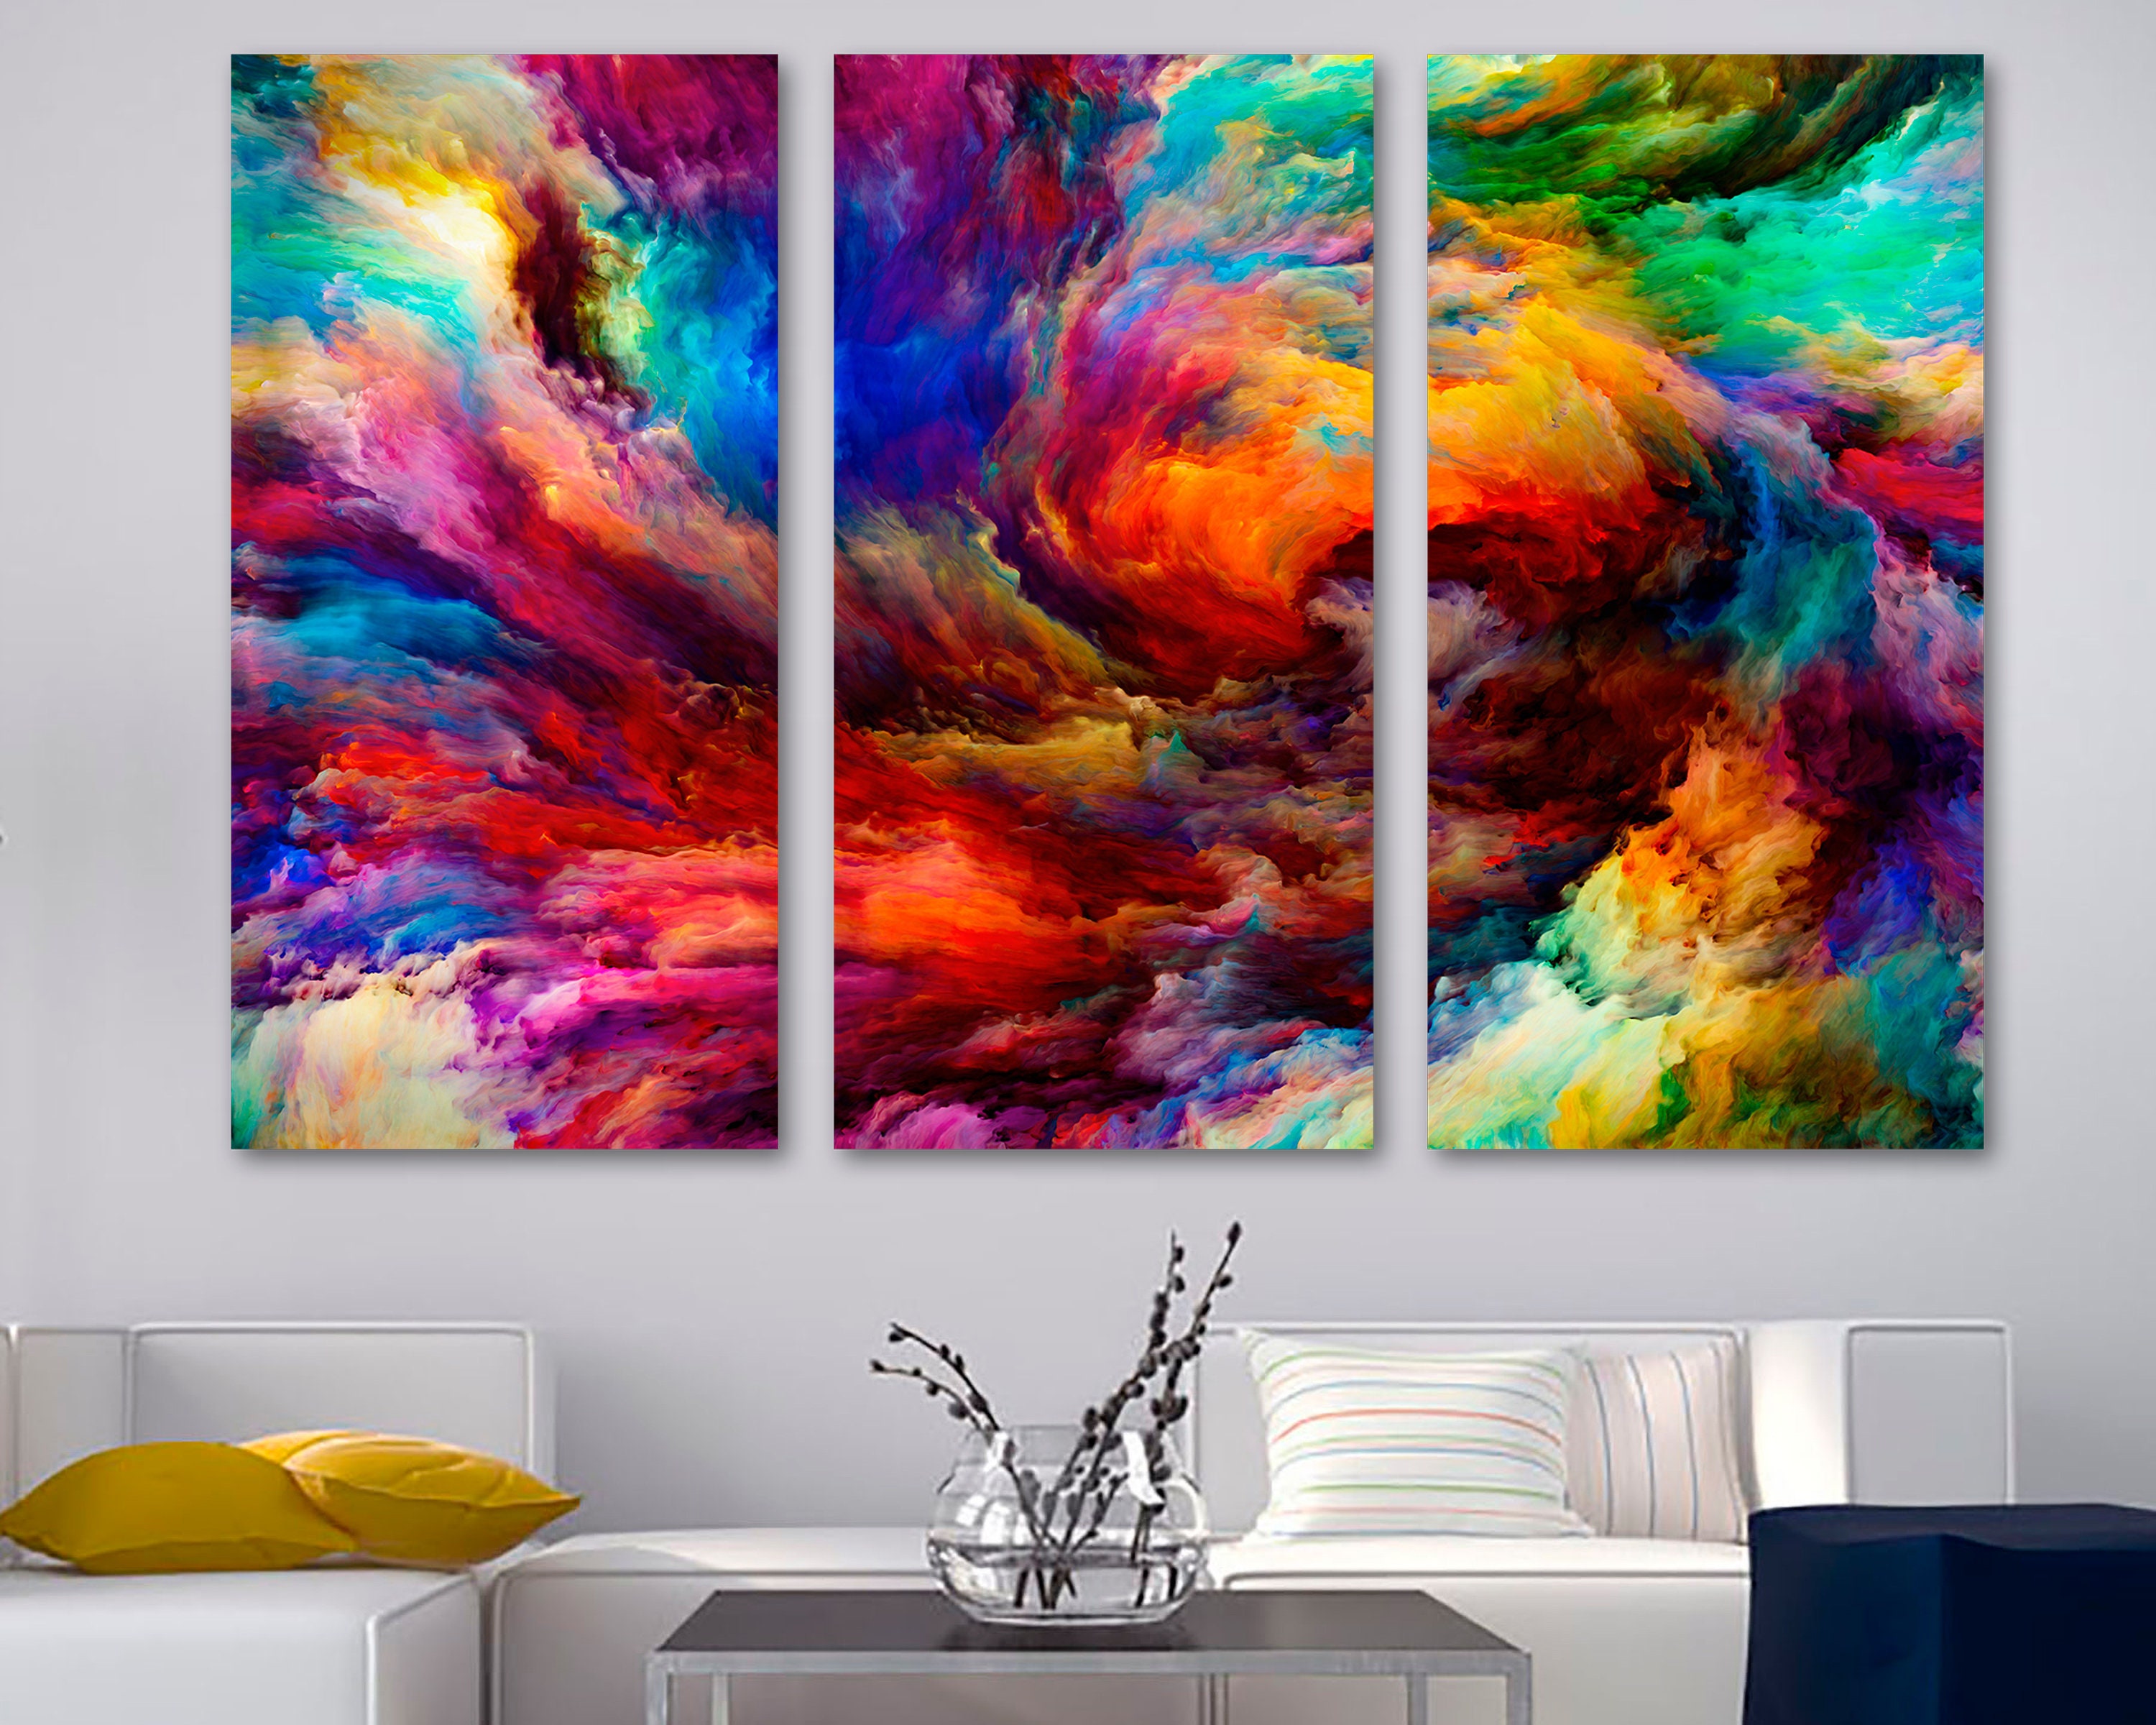 Colorful Abstract Clouds Wall Art Canvas Print Swirling | Etsy